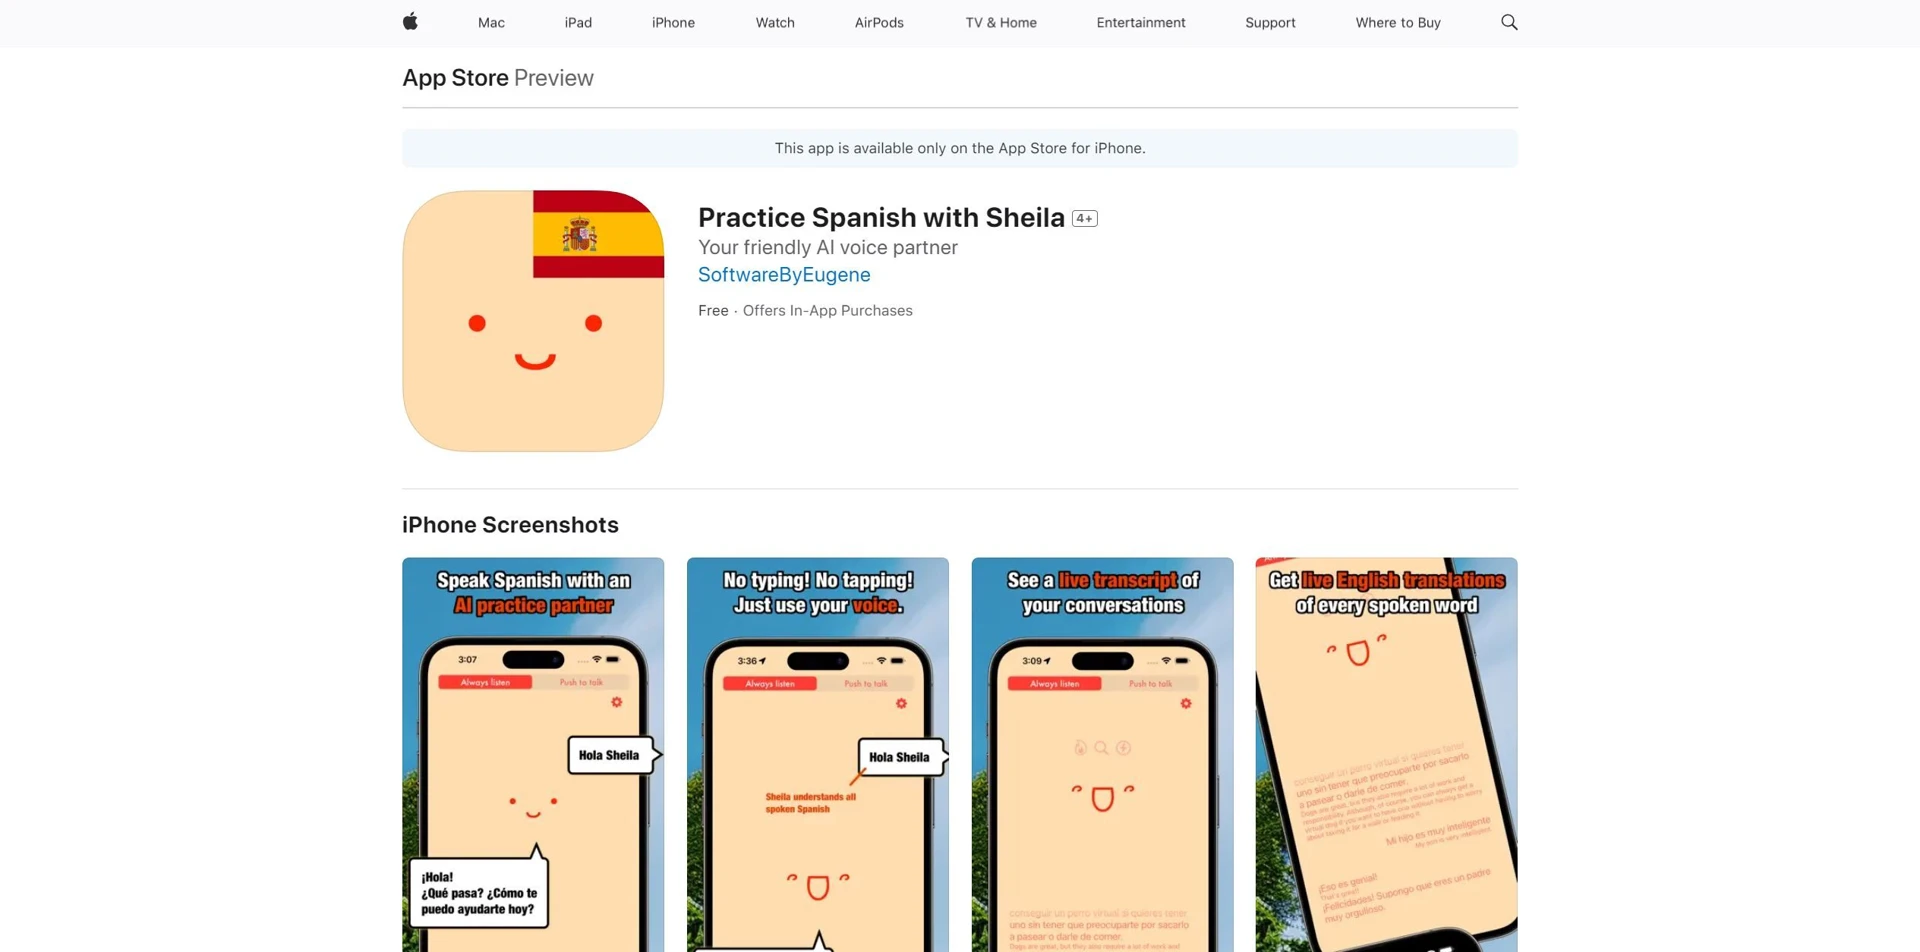 Practice Spanish with Sheilawebsite picture